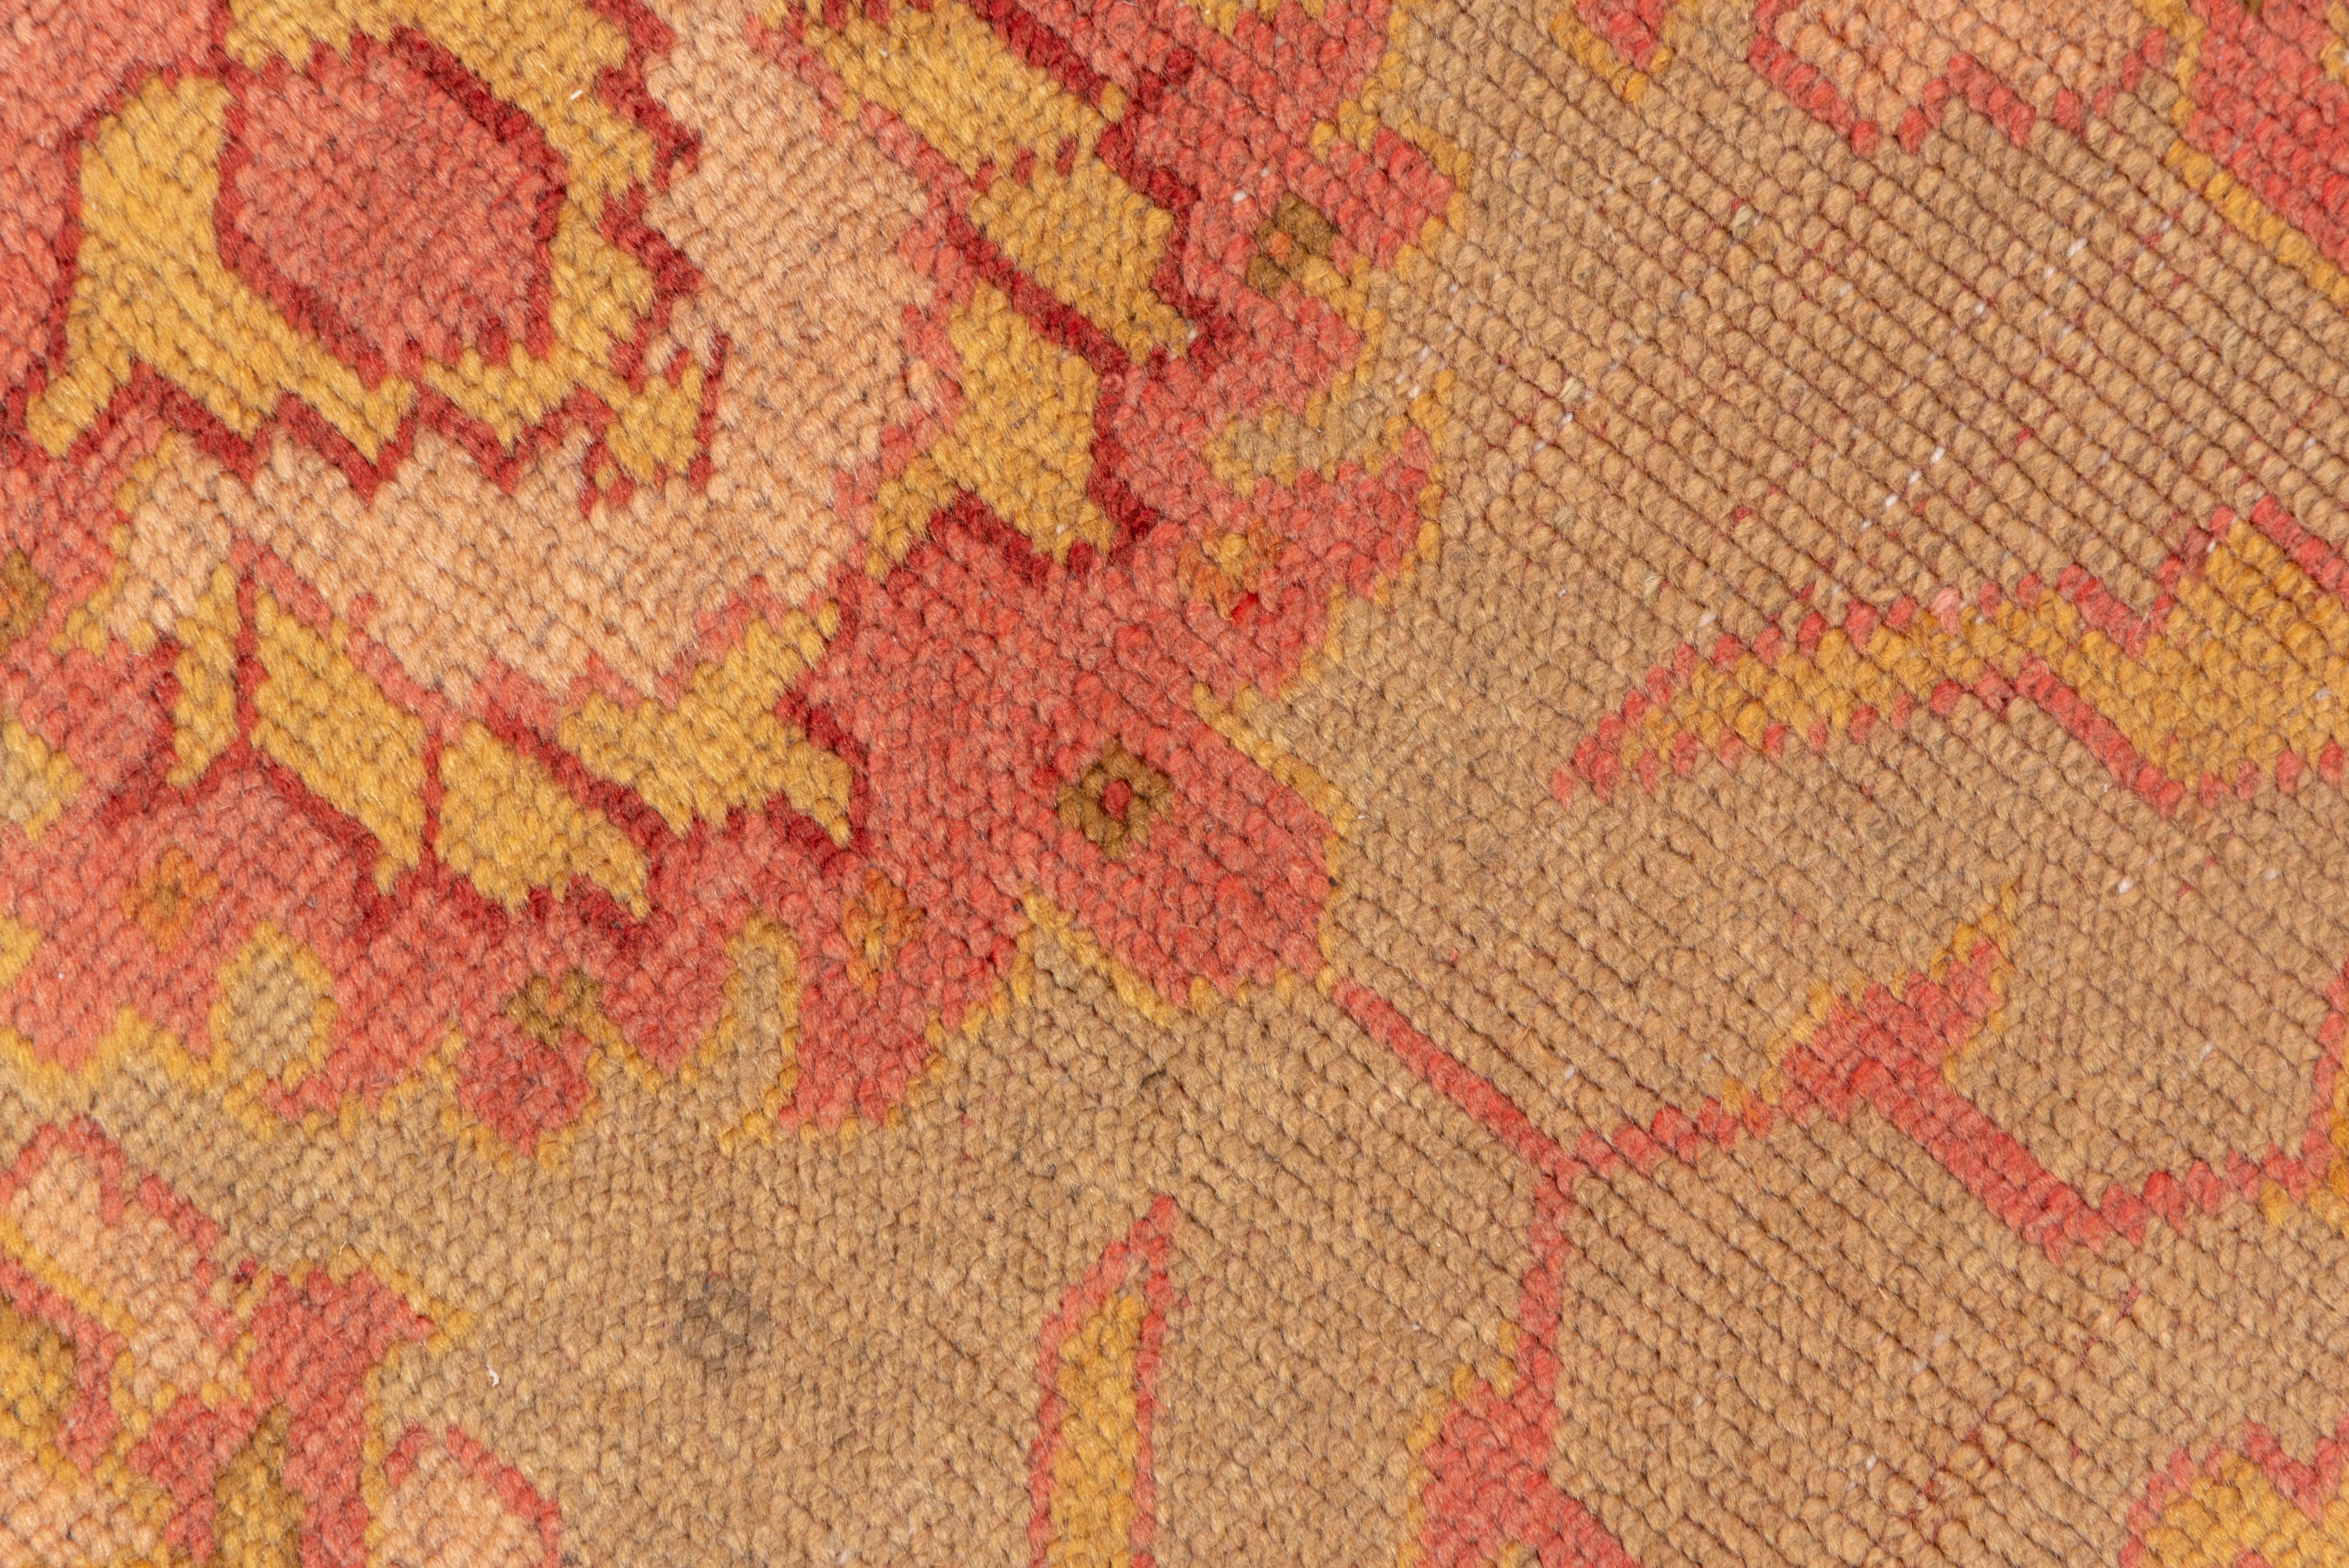 The peach field displays a centrally positioned spacious design of rough palmettes and fringed acanthus leaves, accented in goldenrod, pale tangerine, rust and green. Pale pink border with palmettes, tilted in the corners. Coarse weave, vlongish